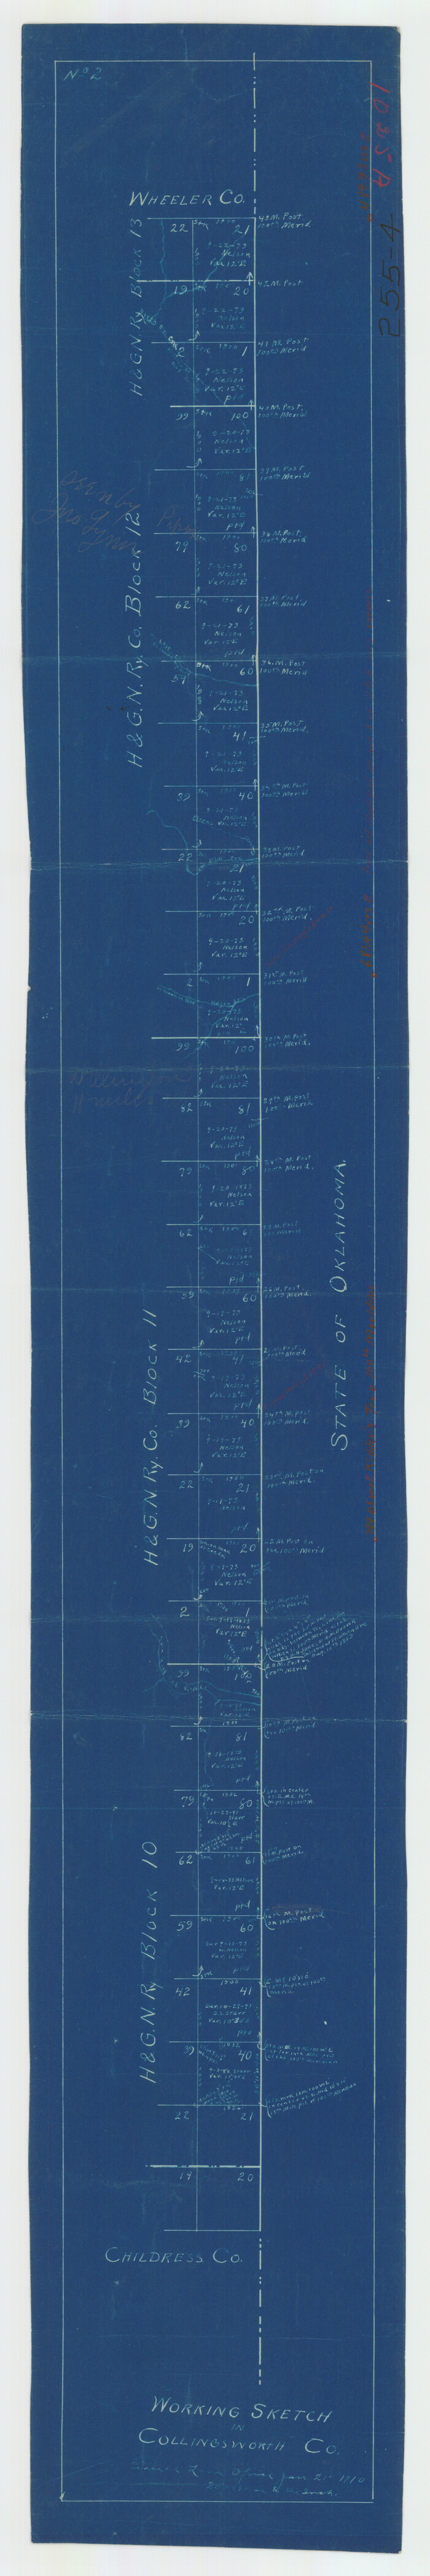 92086, Working Sketch in Collingsworth County [showing East line of County along border with Oklahoma], Twichell Survey Records